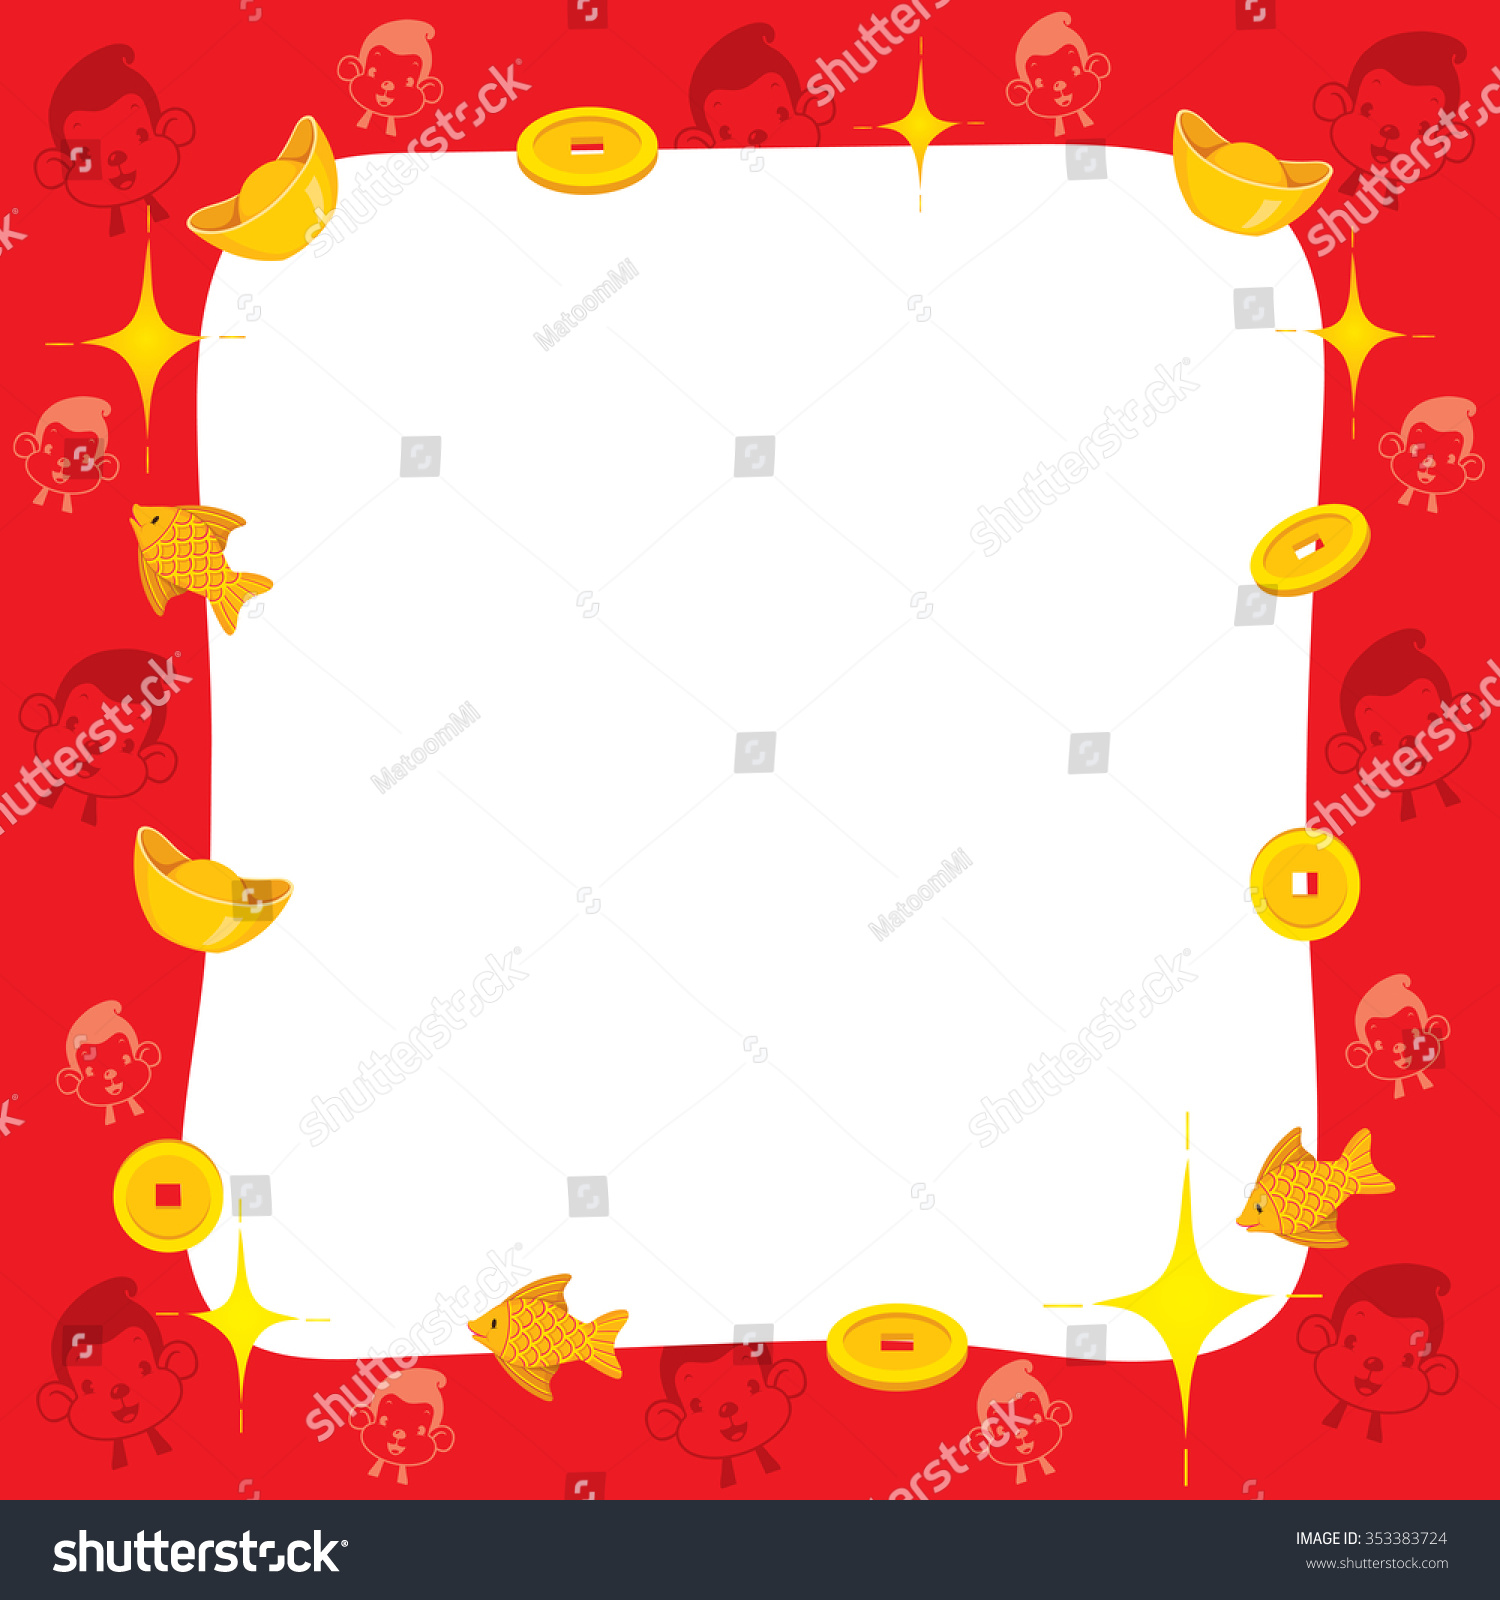 happy chinese new year 2014 clipart free - photo #29